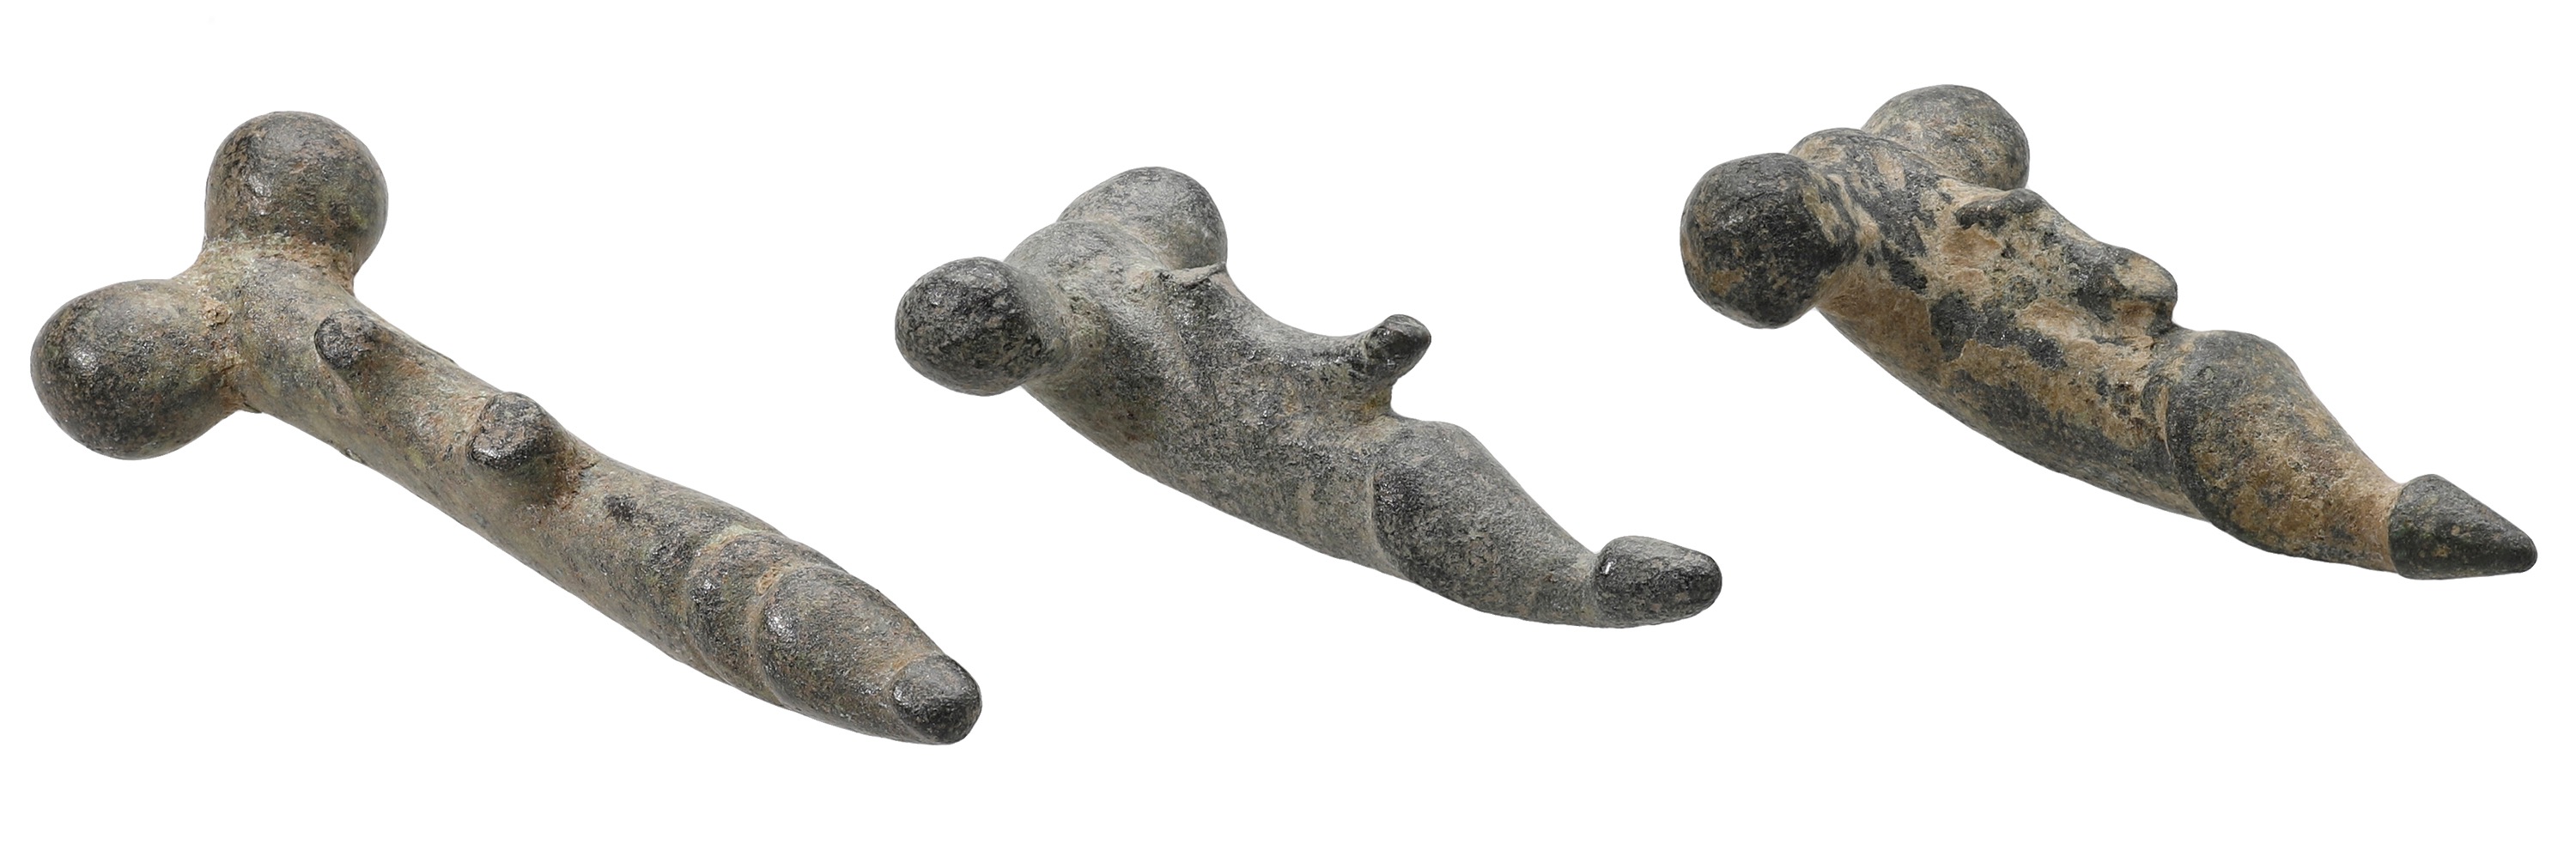 Roman, bronze phallic pendants (3), 2nd century AD, all moulded in the round with a slightly... - Image 2 of 2